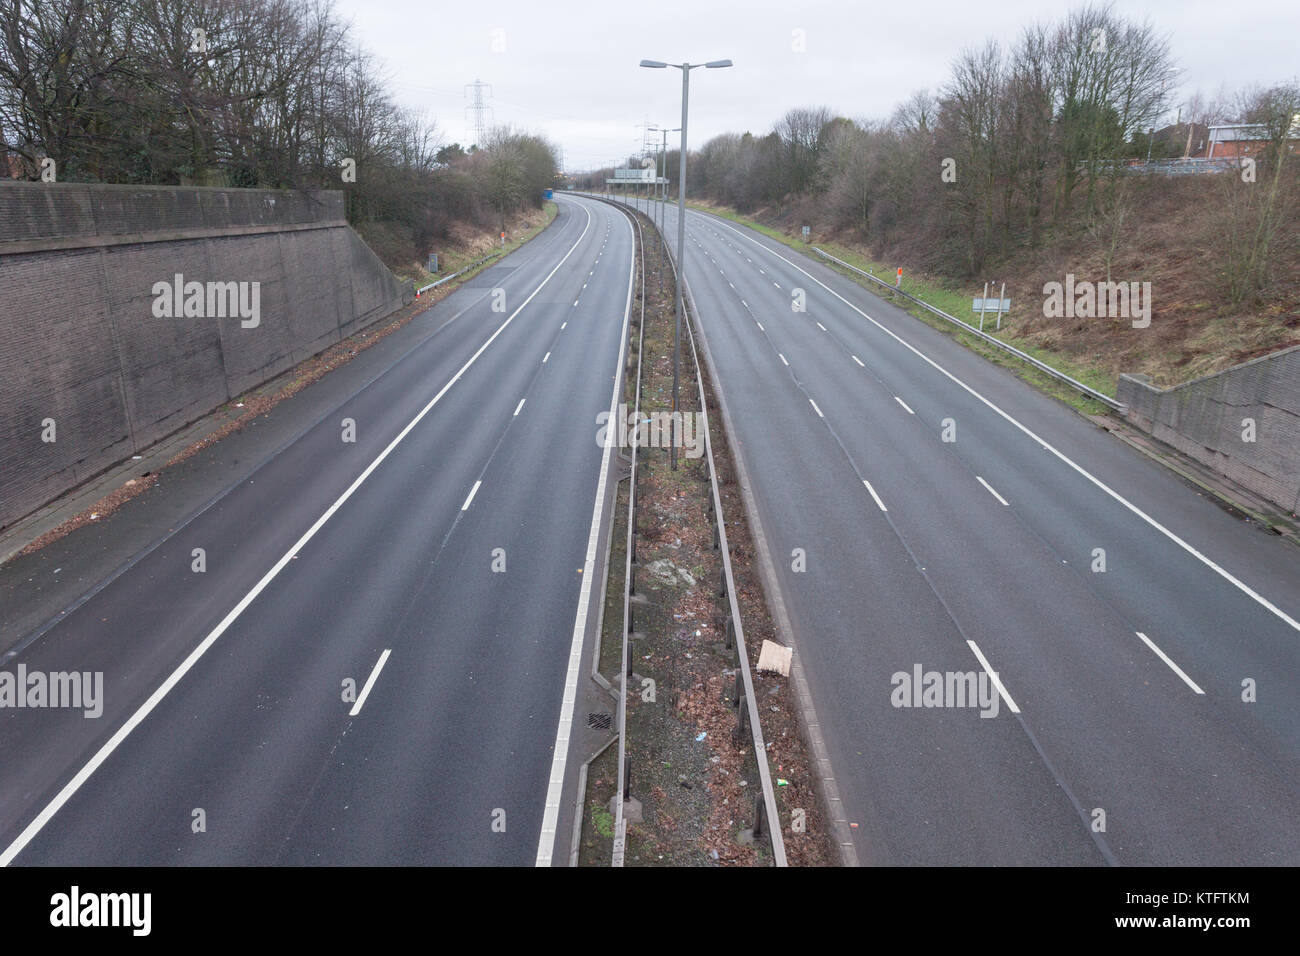 Quinton, West Midlands, UK. 25th December, 2017. The normally extremely busy stretch of M5 motorway that goes through Birmingham is empty of traffic at 8.00am on Christmas Day morning. Stock Photo